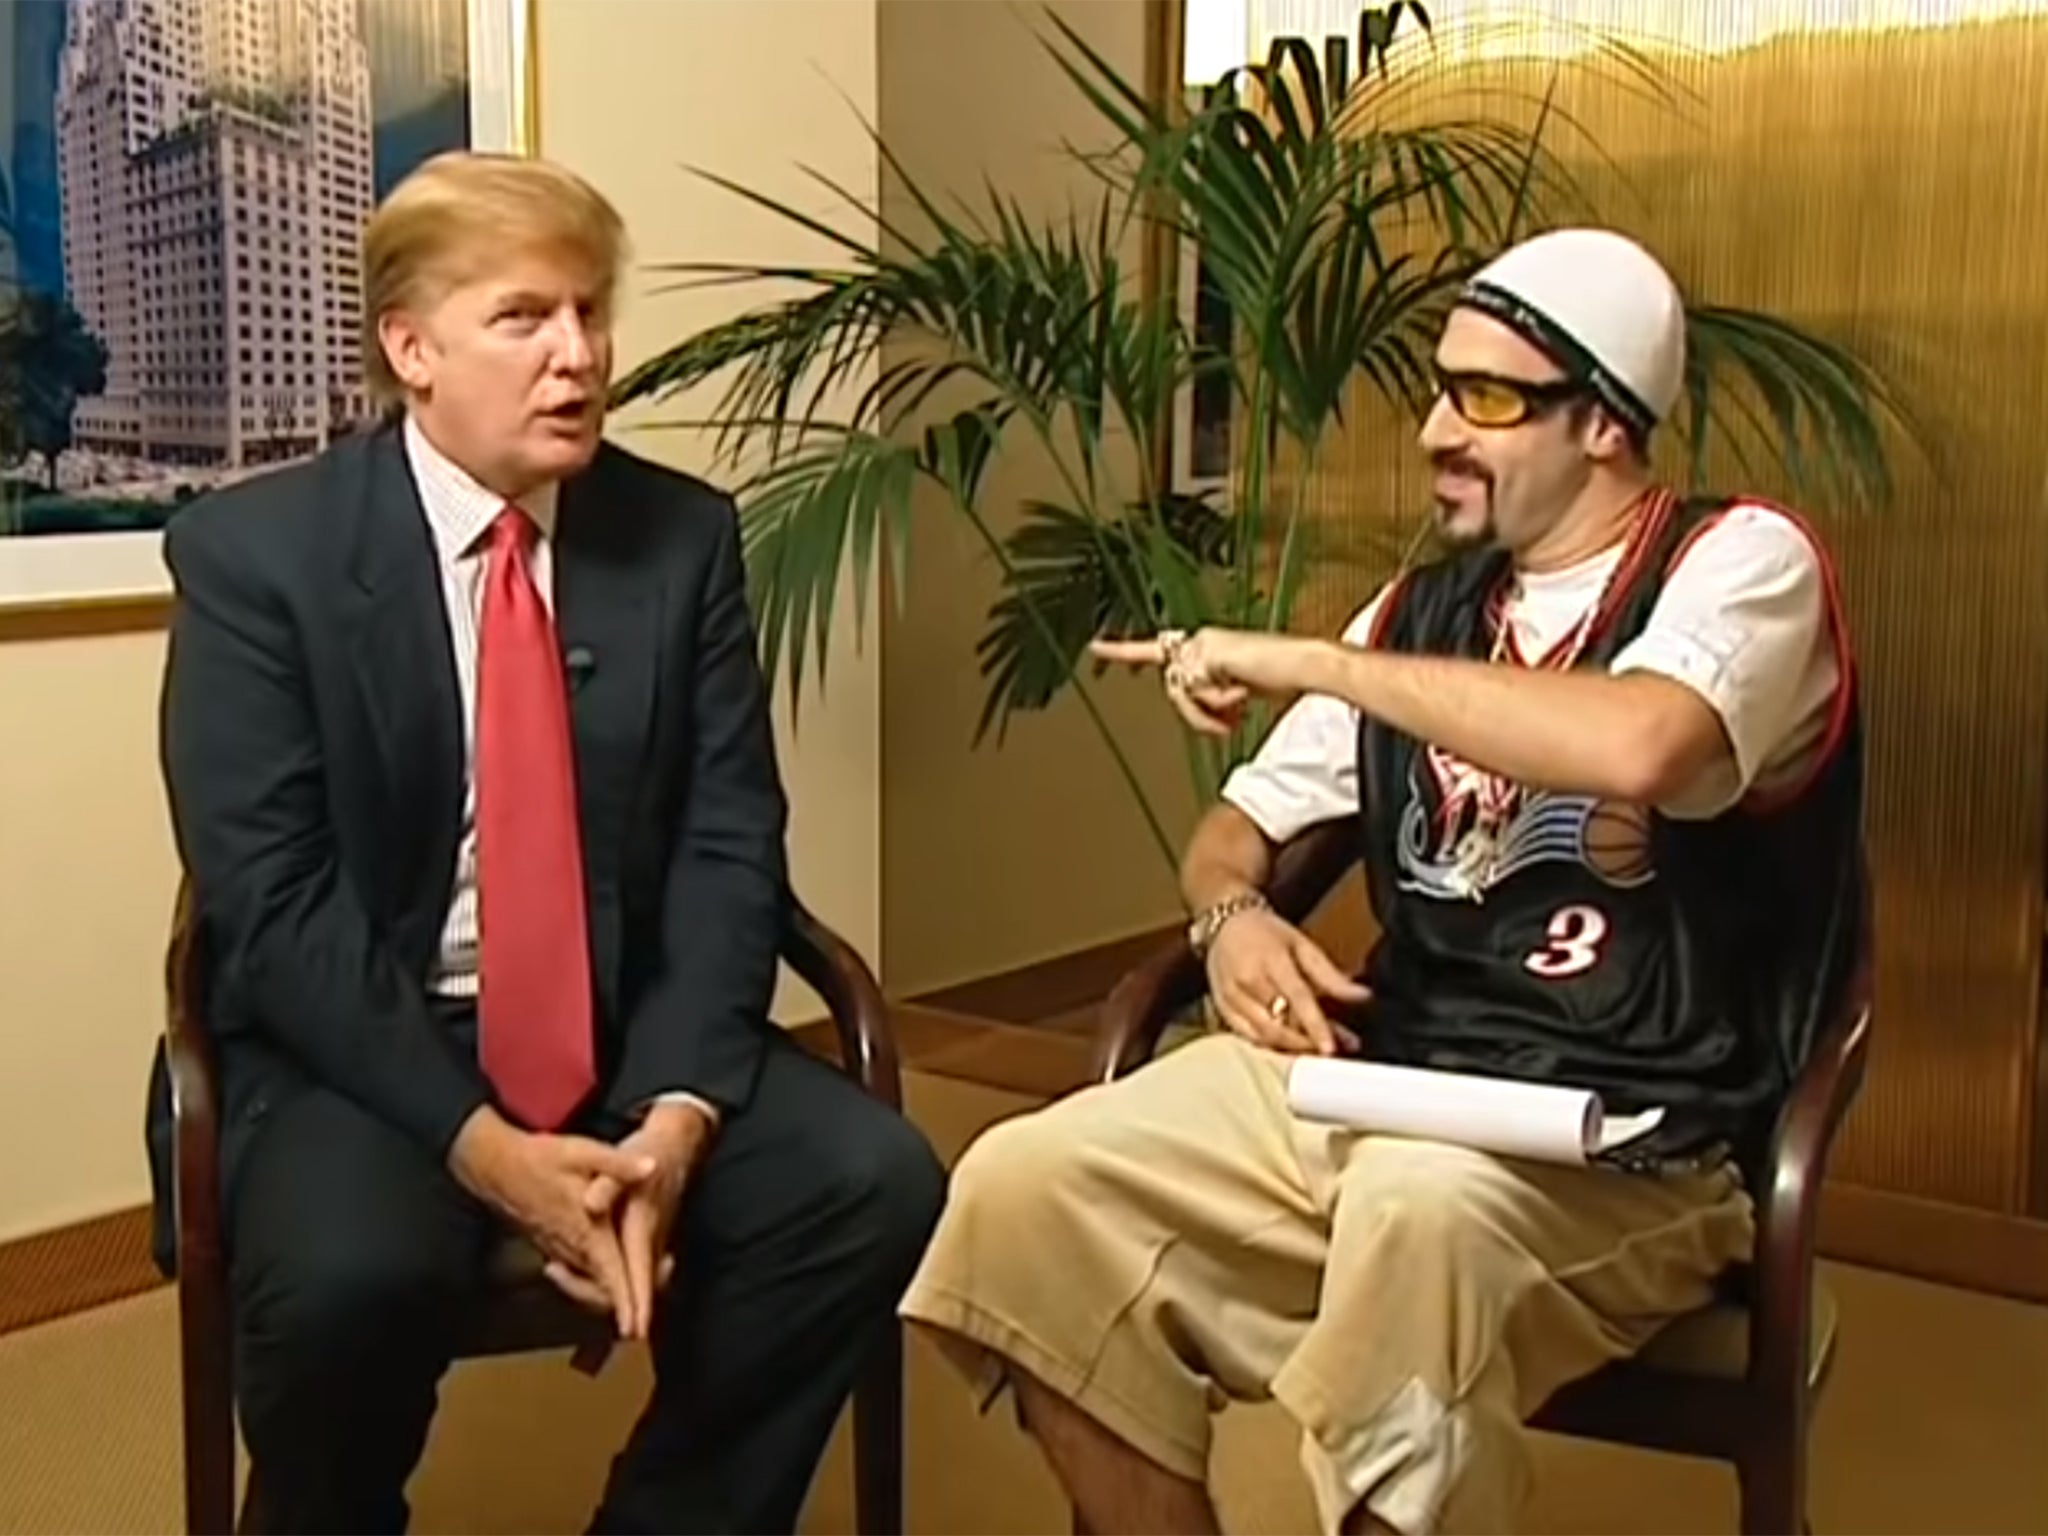 Ali G could not get Donald Trump on board with his ‘ice cream glove’ concept